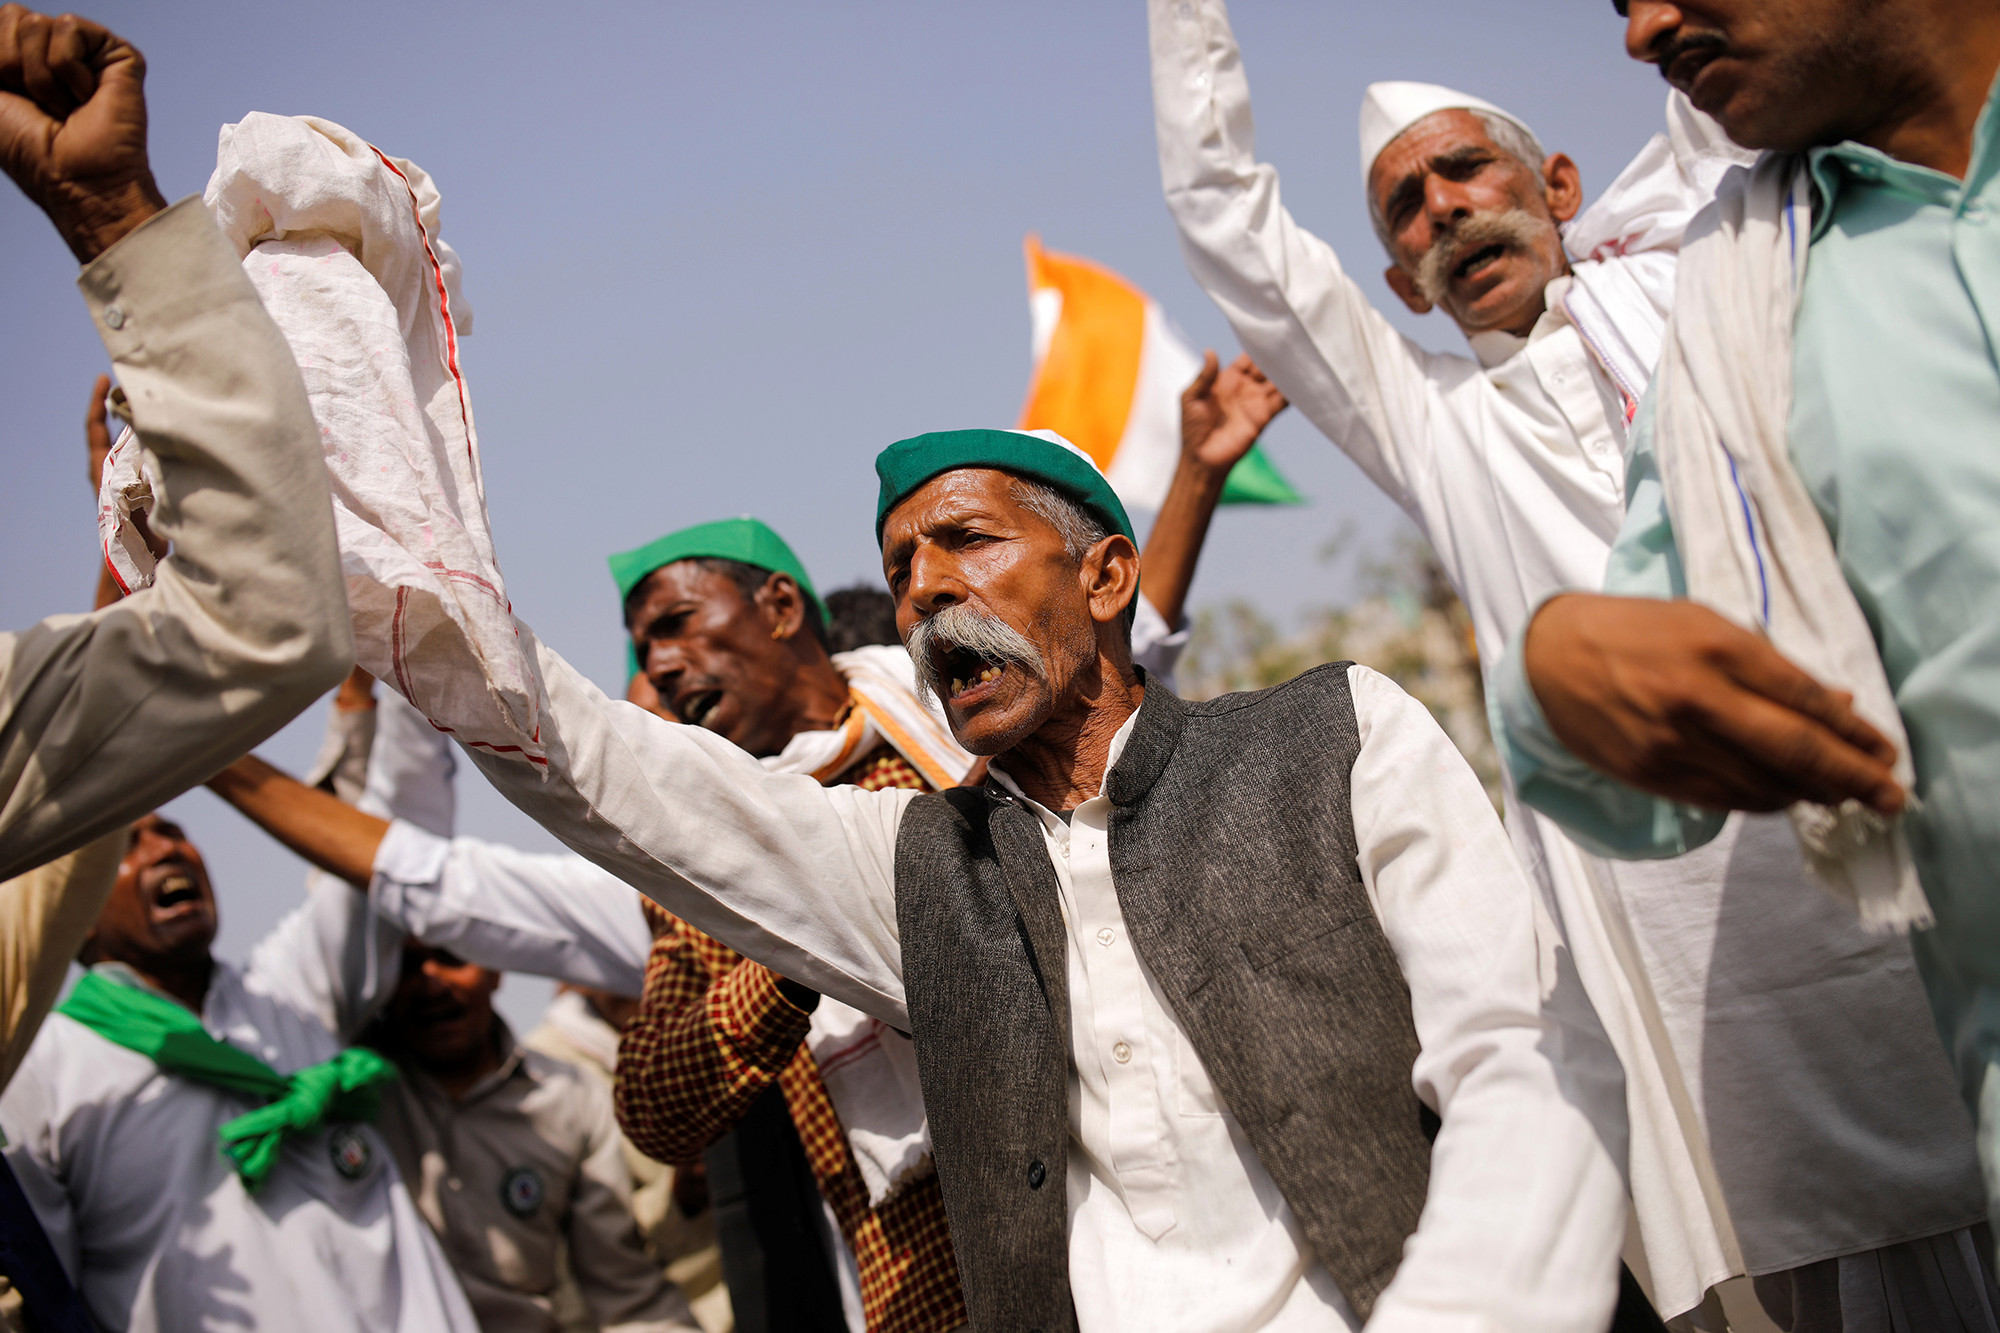 Farmers dance as they sing a folk song during a 12-hour strike, as part of protests against farm laws, on a highway at the Delhi-Uttar Pradesh border in Ghaziabad, India, March 26, 2021.